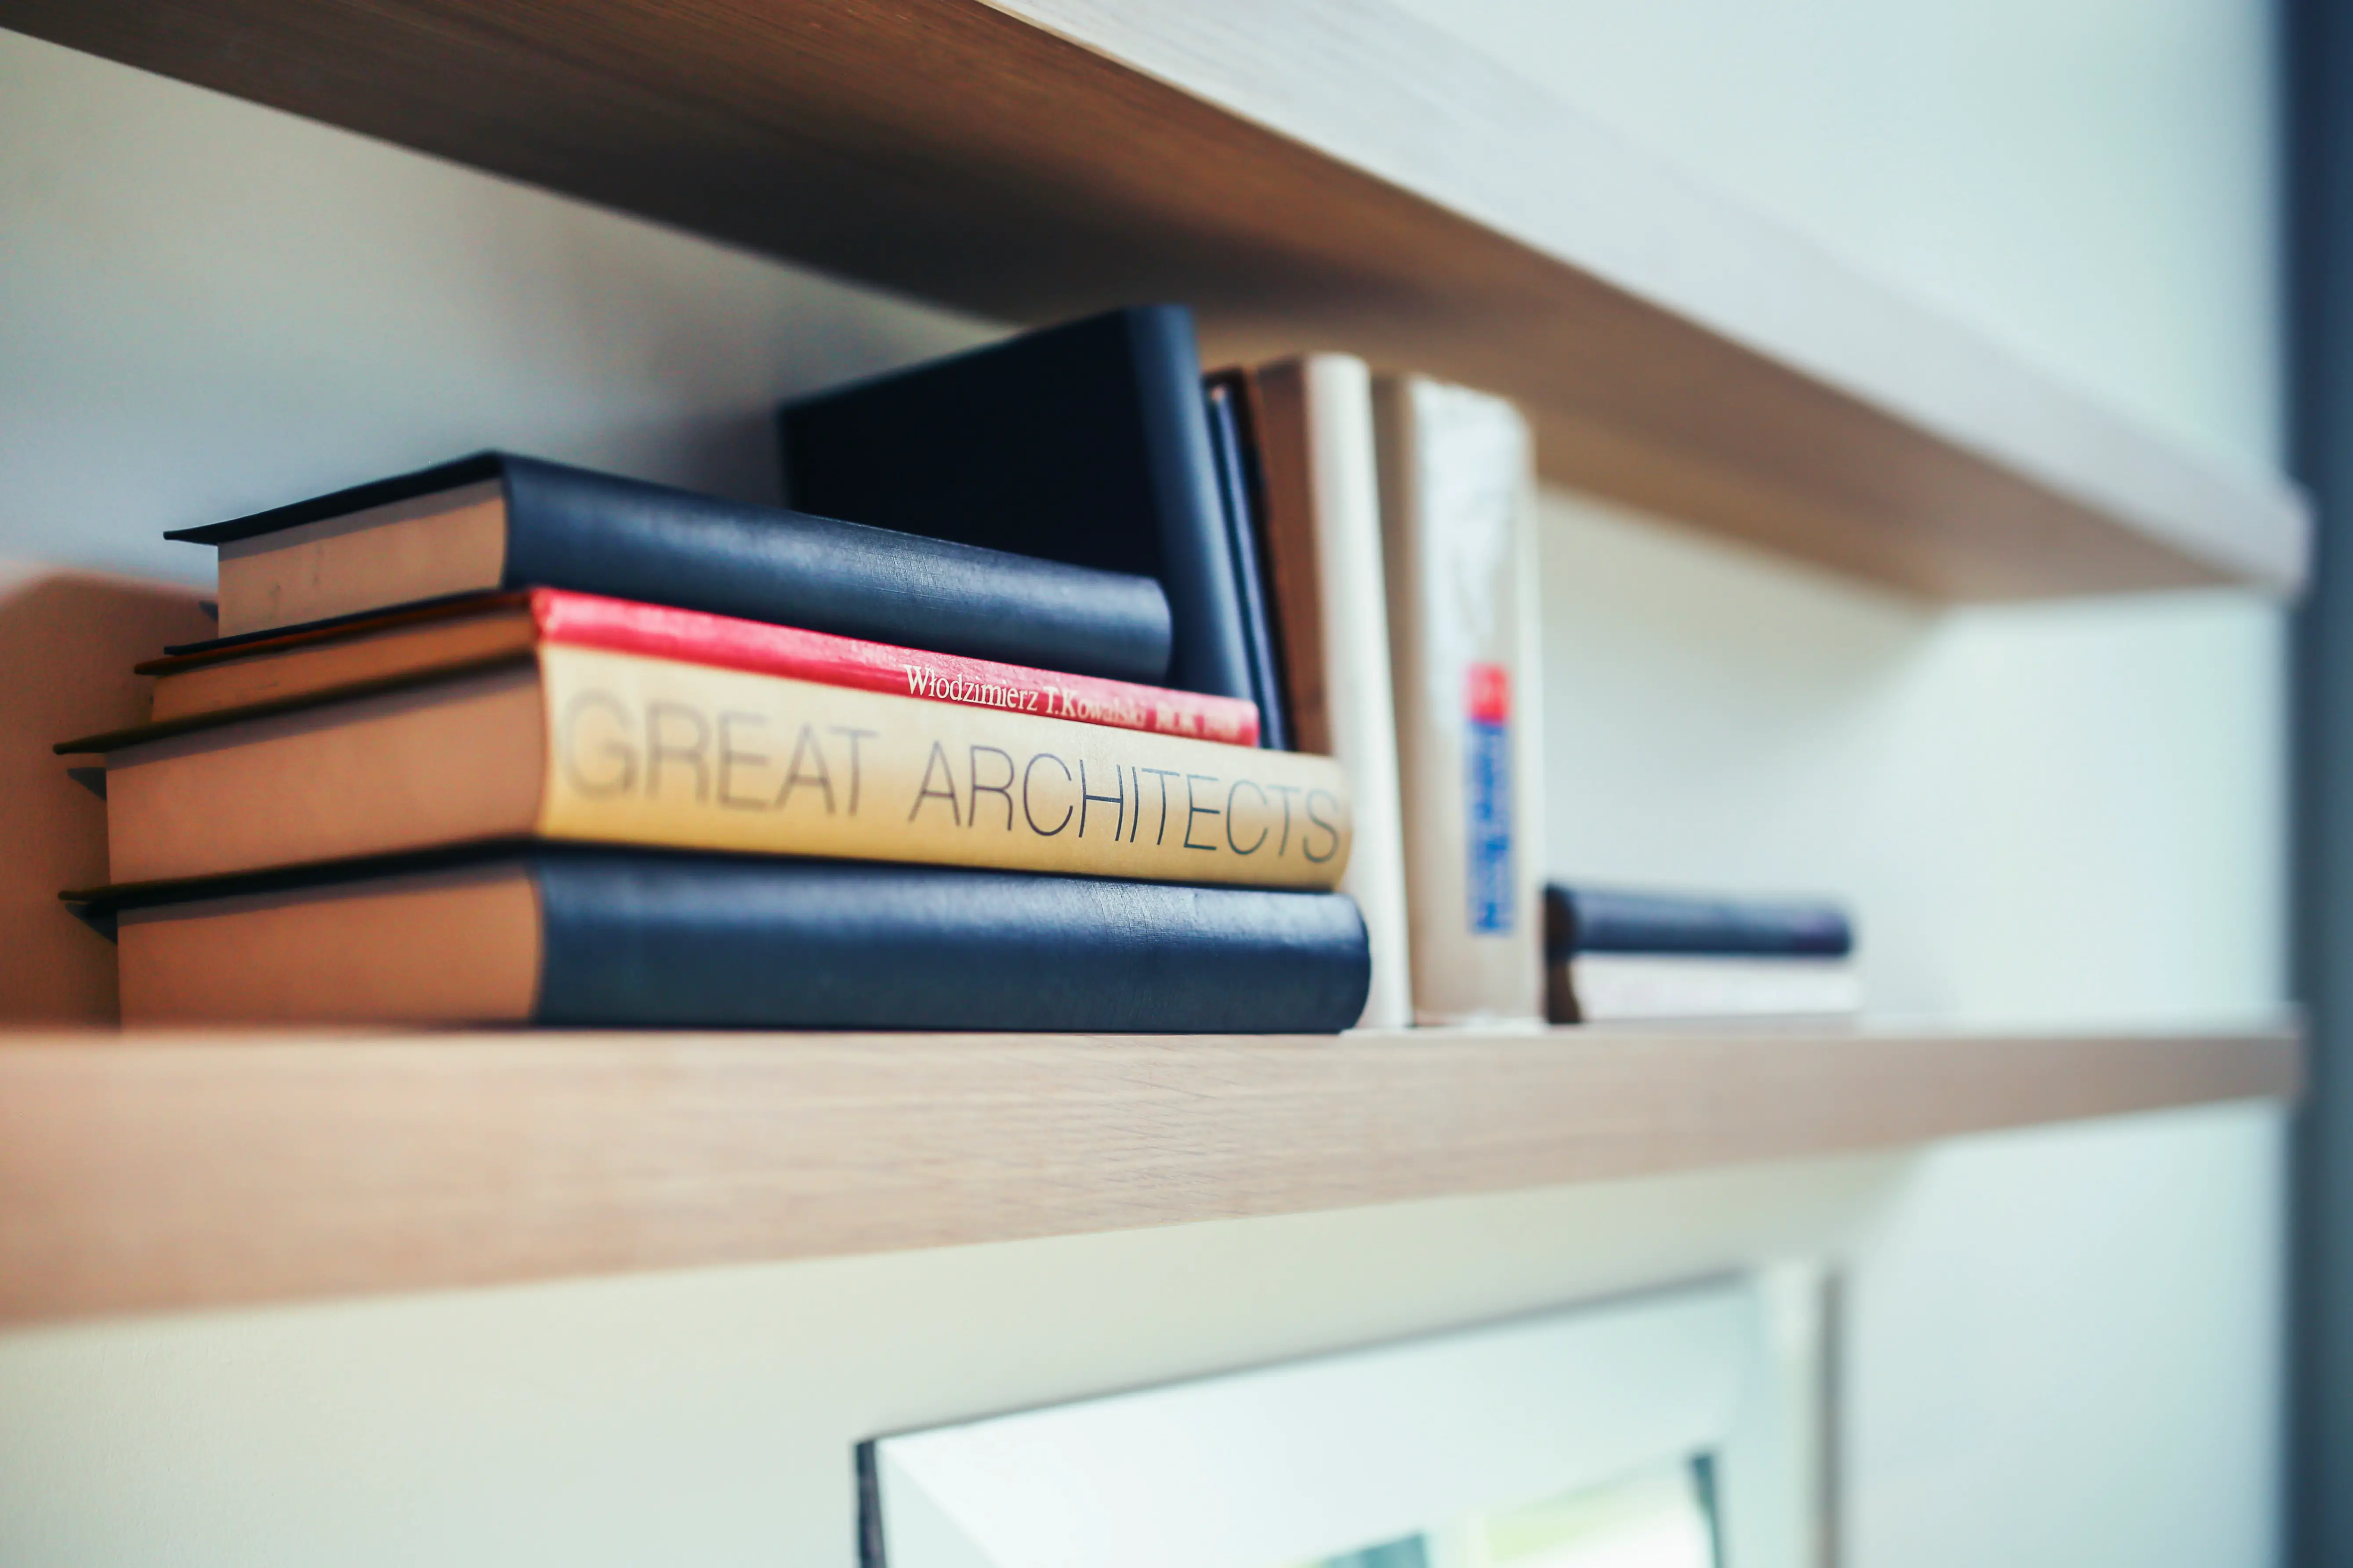 An in-depth review of the best floating bookshelves available in 2019.